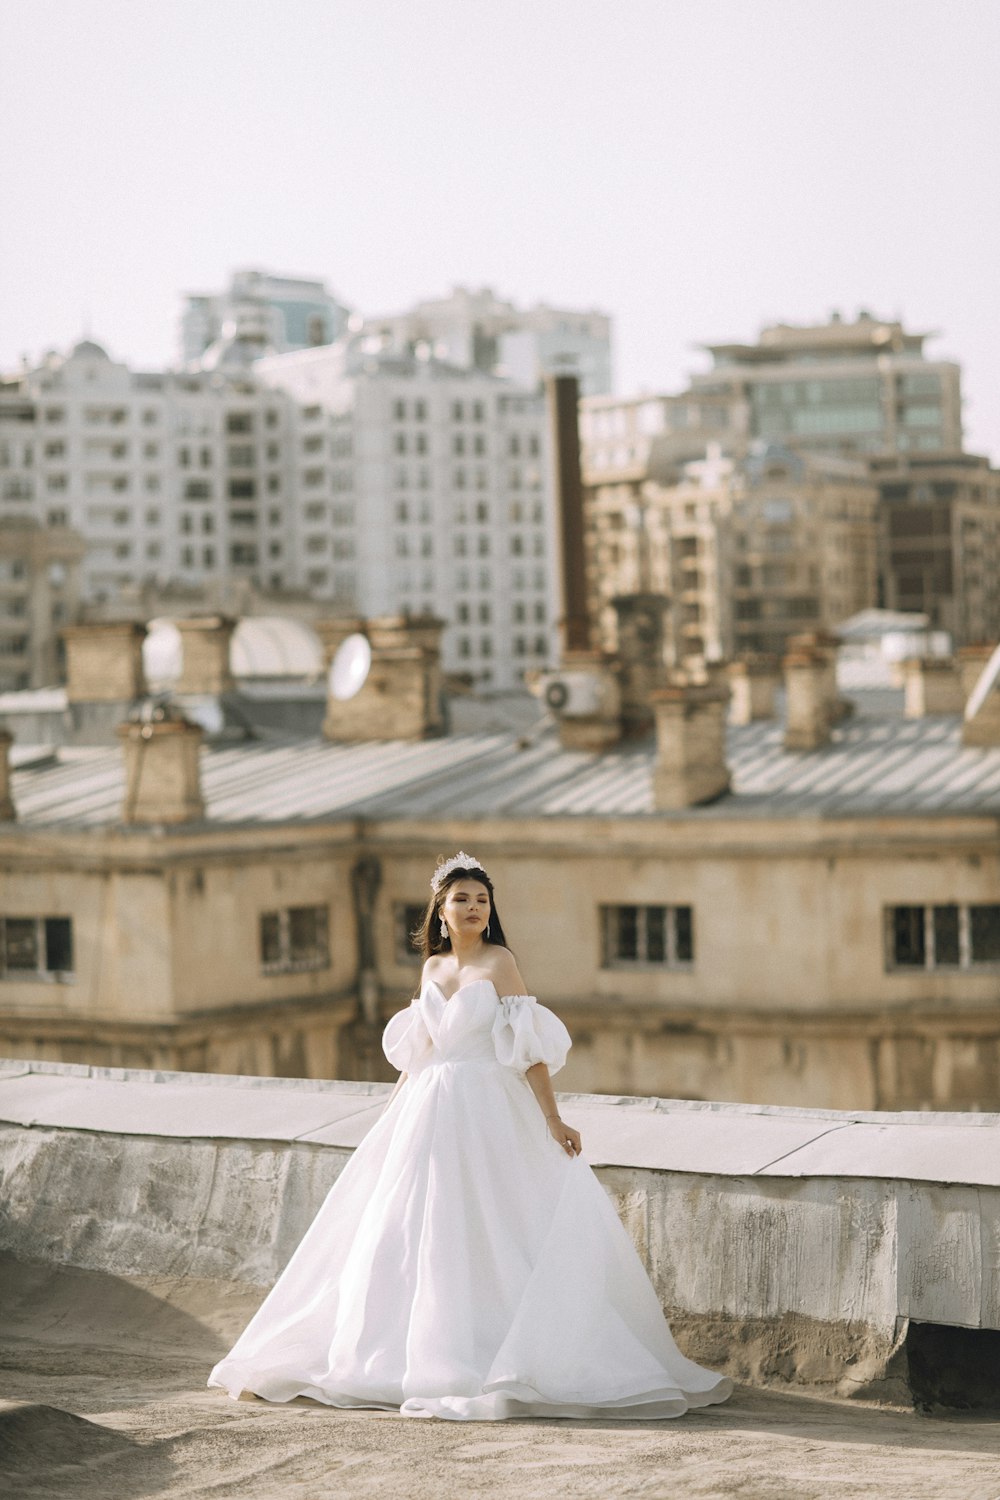 a woman in a white dress standing on a roof